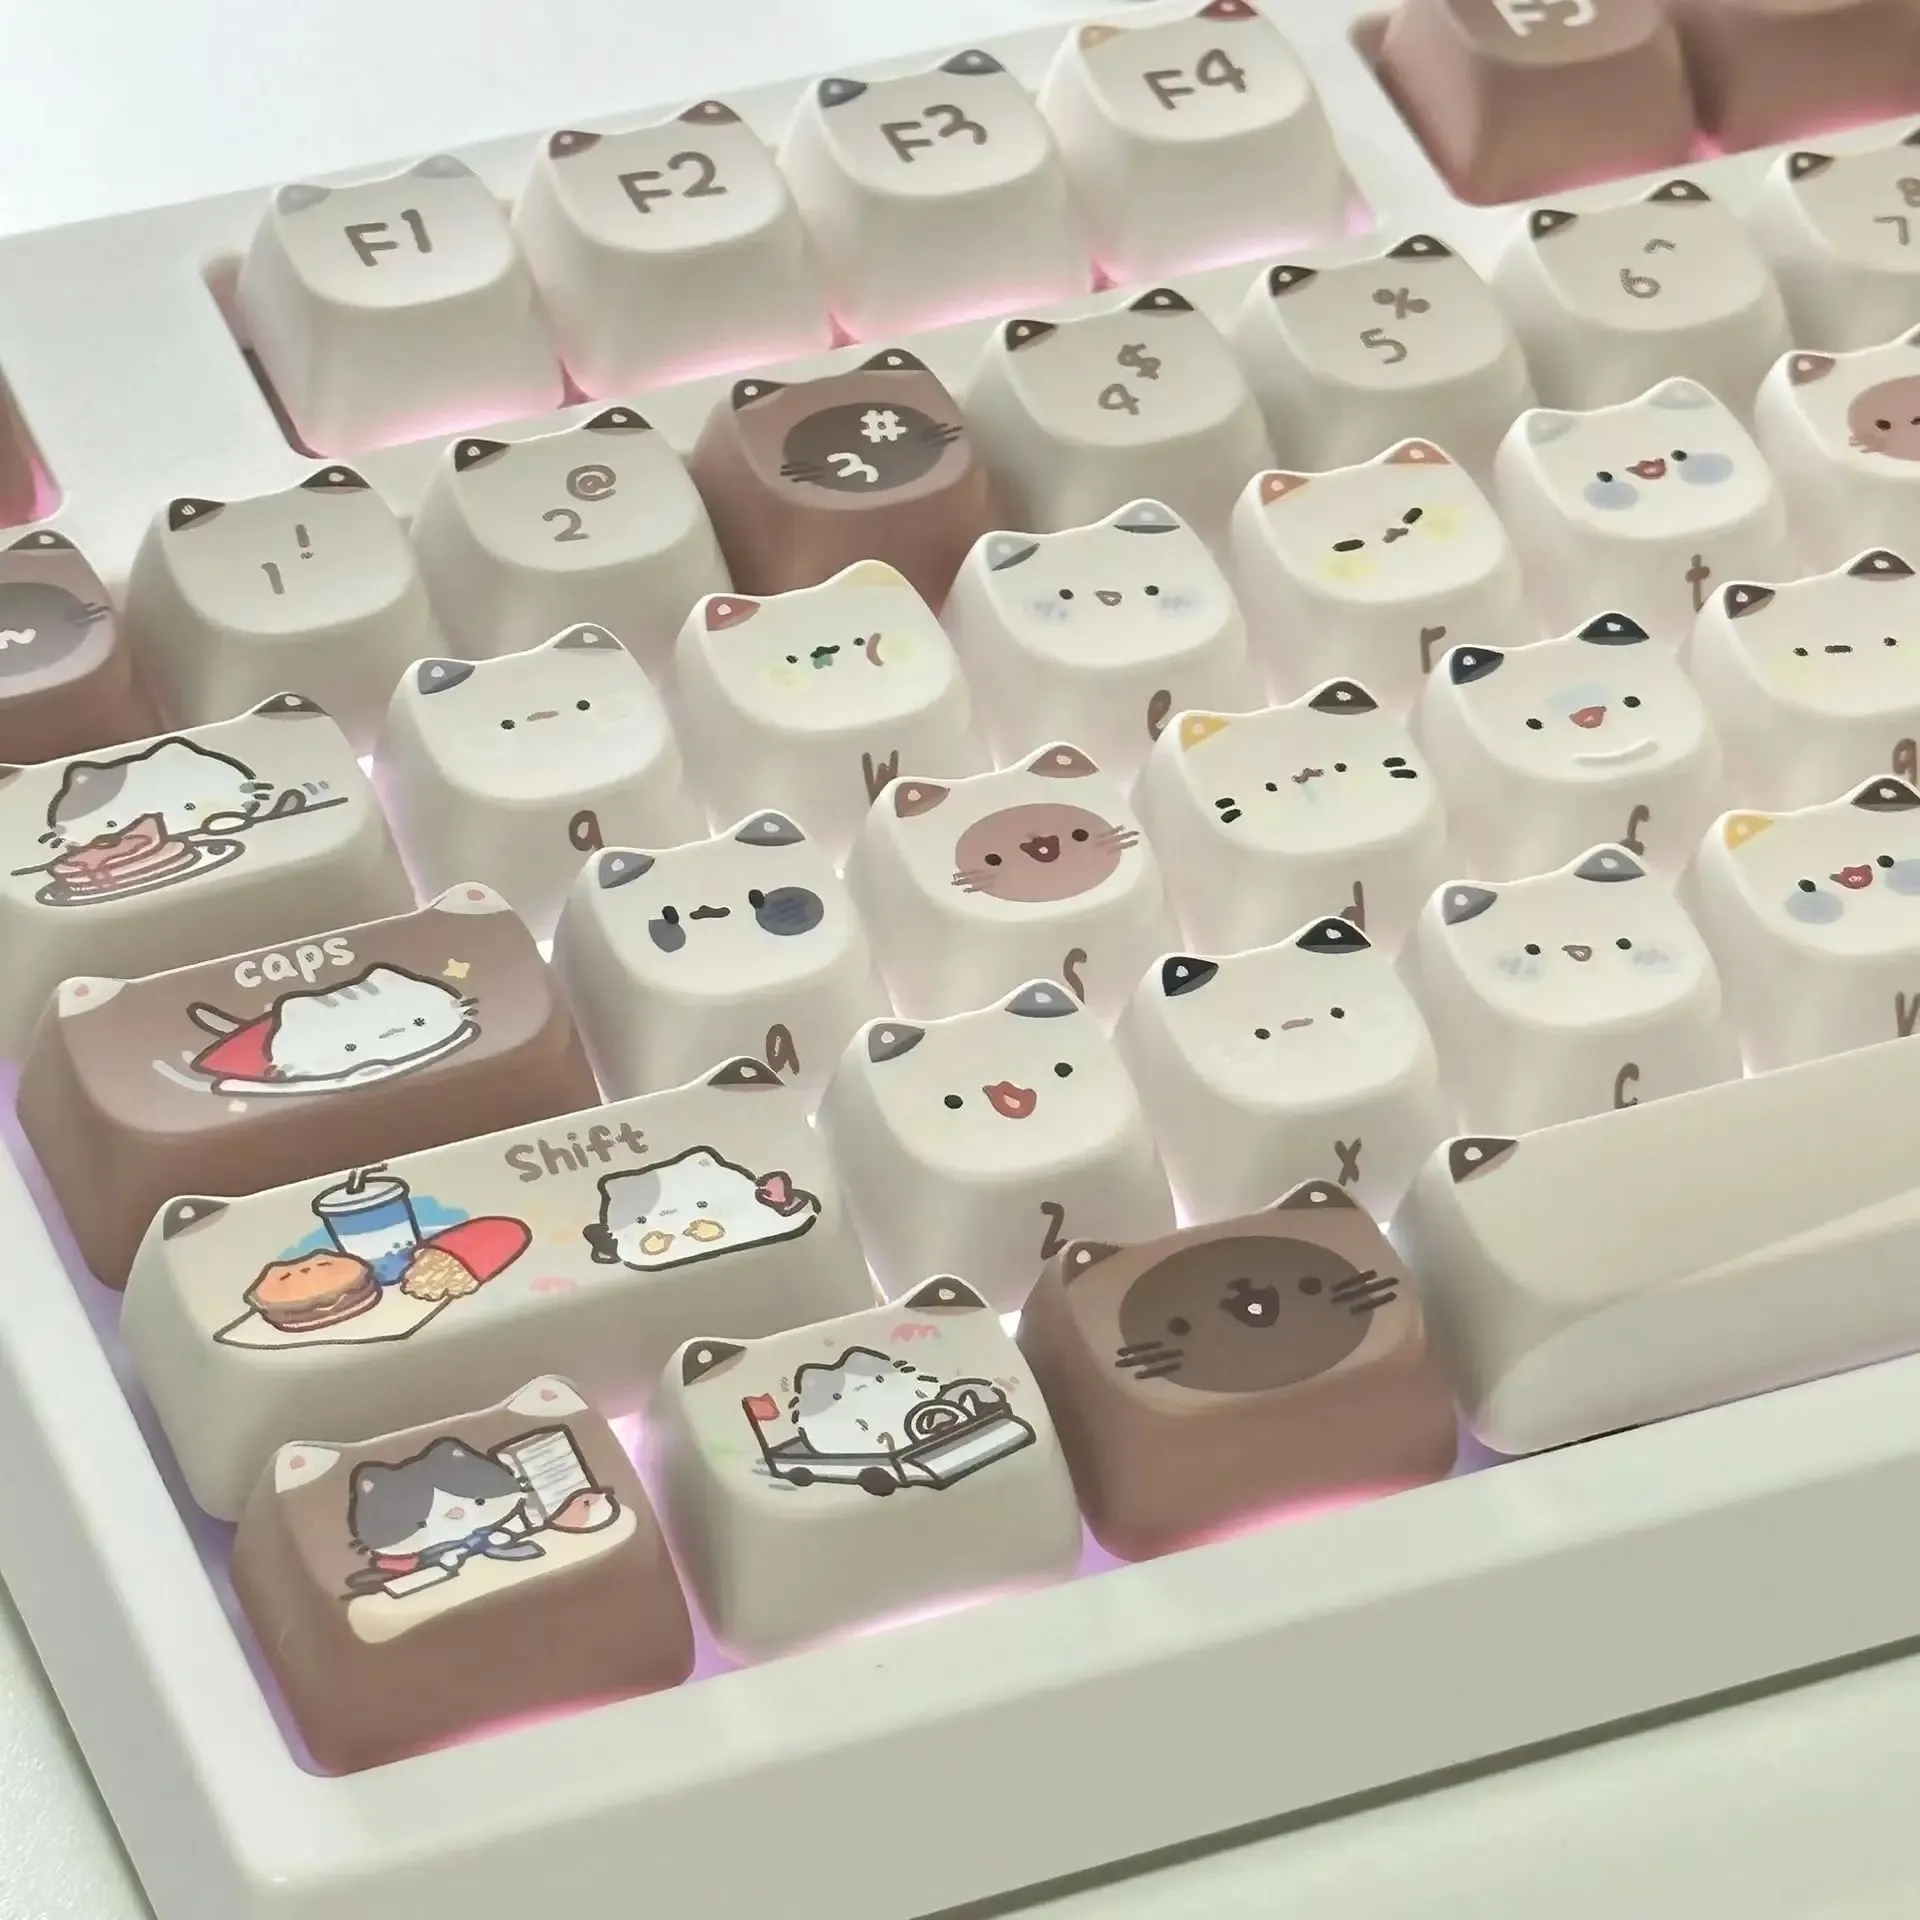 Accessories Cute Meow Keycaps Cat Head MAO Profile PBT Square Key Cap Thermal Sublimation Mechanical Keyboard Keycap Set For Girls Gift